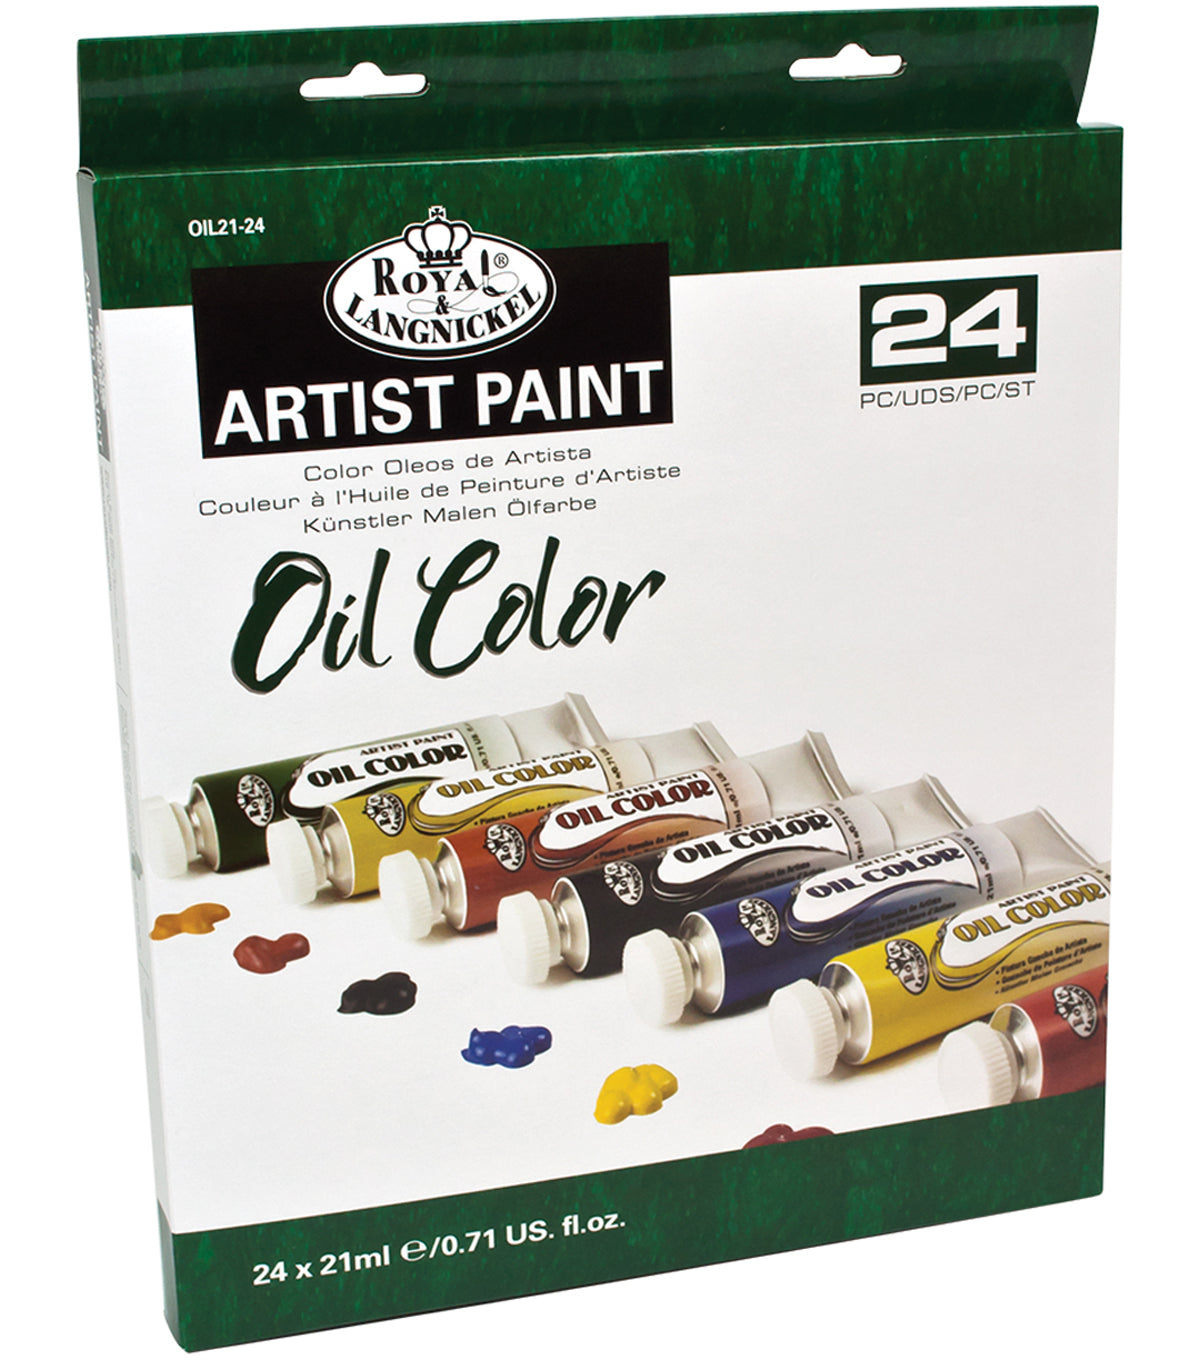 Acrylic Paint Set 24 Colors (0.41 oz, 12 ml) Paint Kit For Artists &  Beginners Craft Paints for Paper,Canvas,Rock Painting,Wood,Ceramic & Fabric